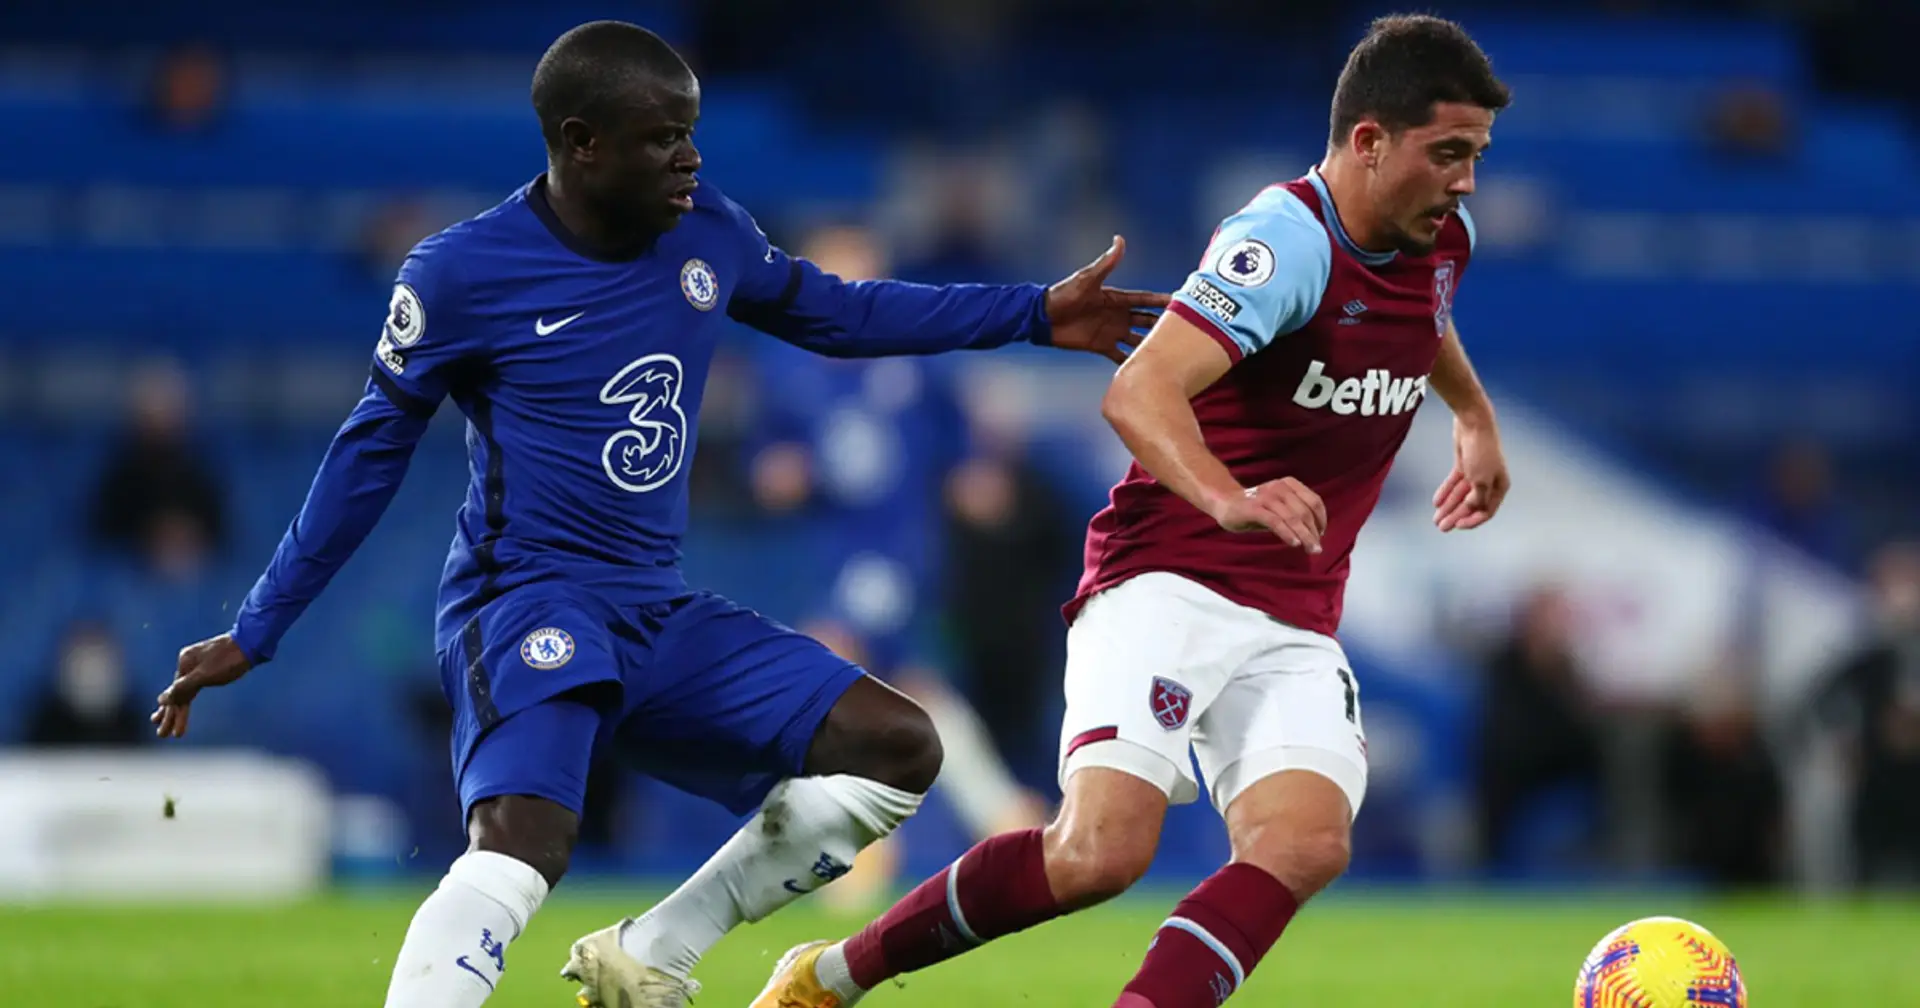 Chelsea vs Burnley: Team news, predicted line-up, score predictions and more - preview